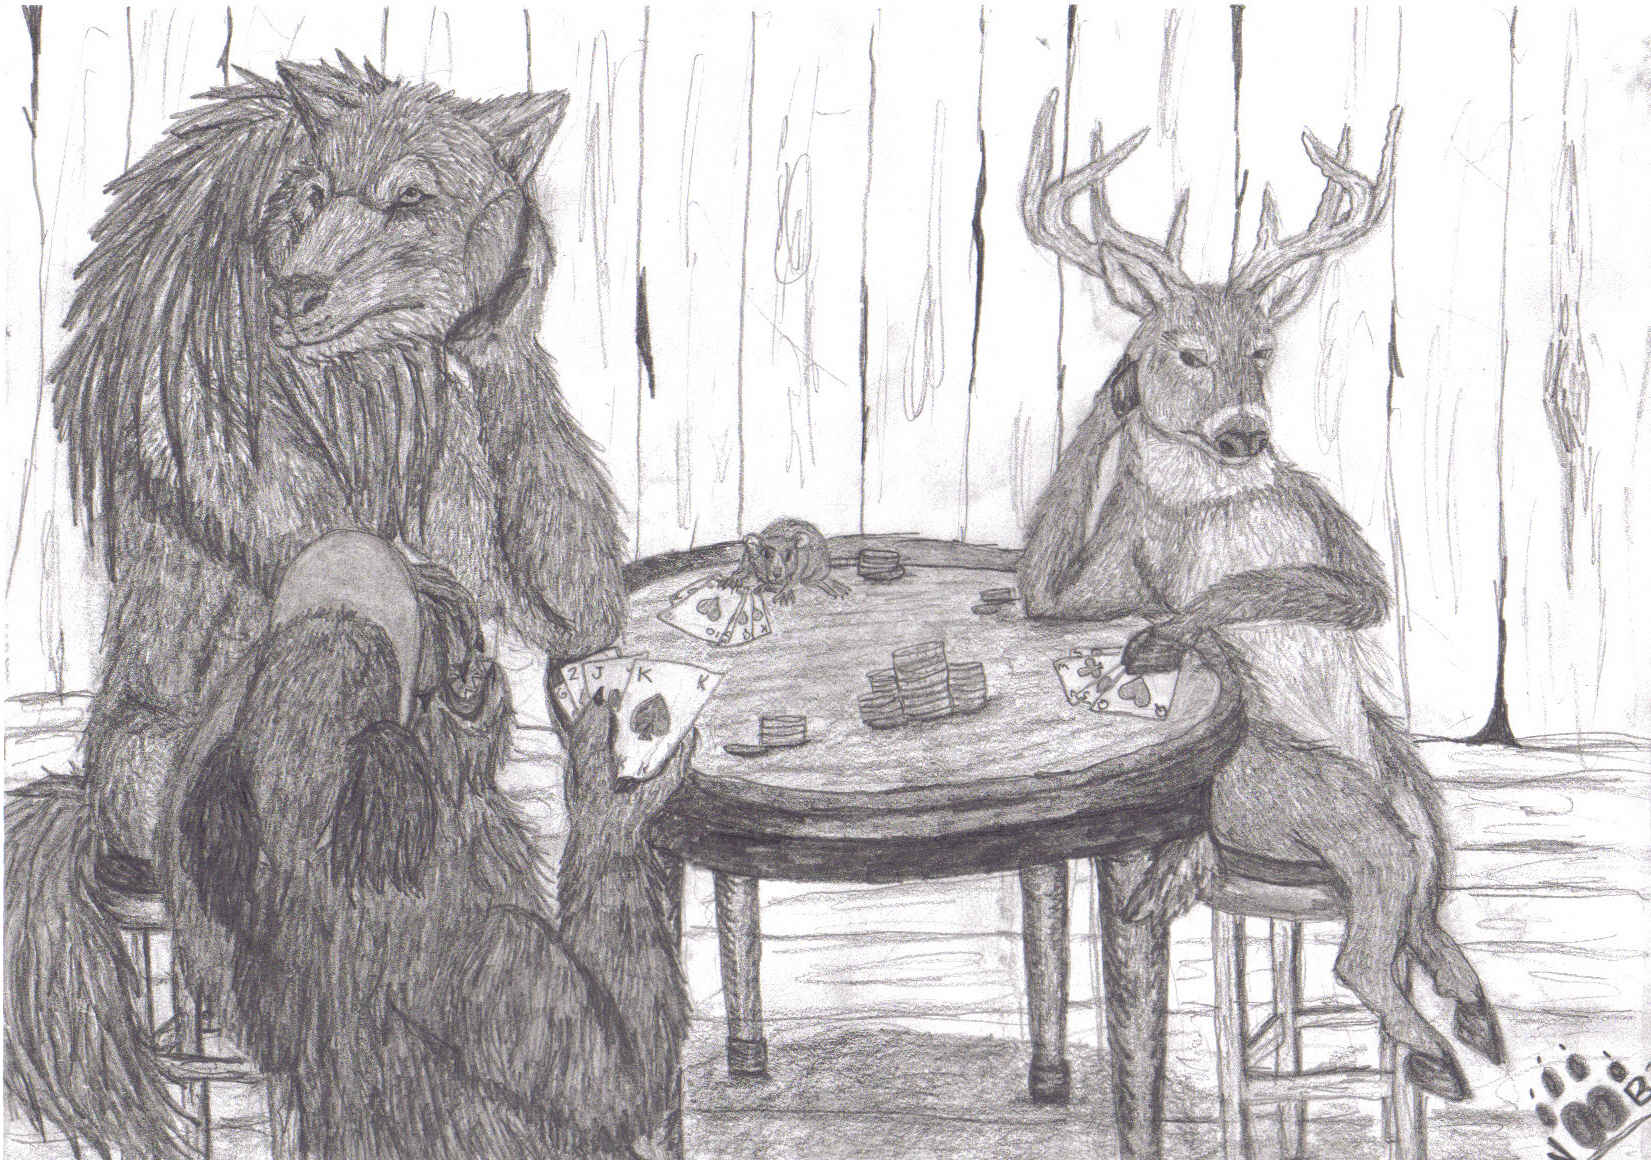 Poker Night at the Shack by riotawny